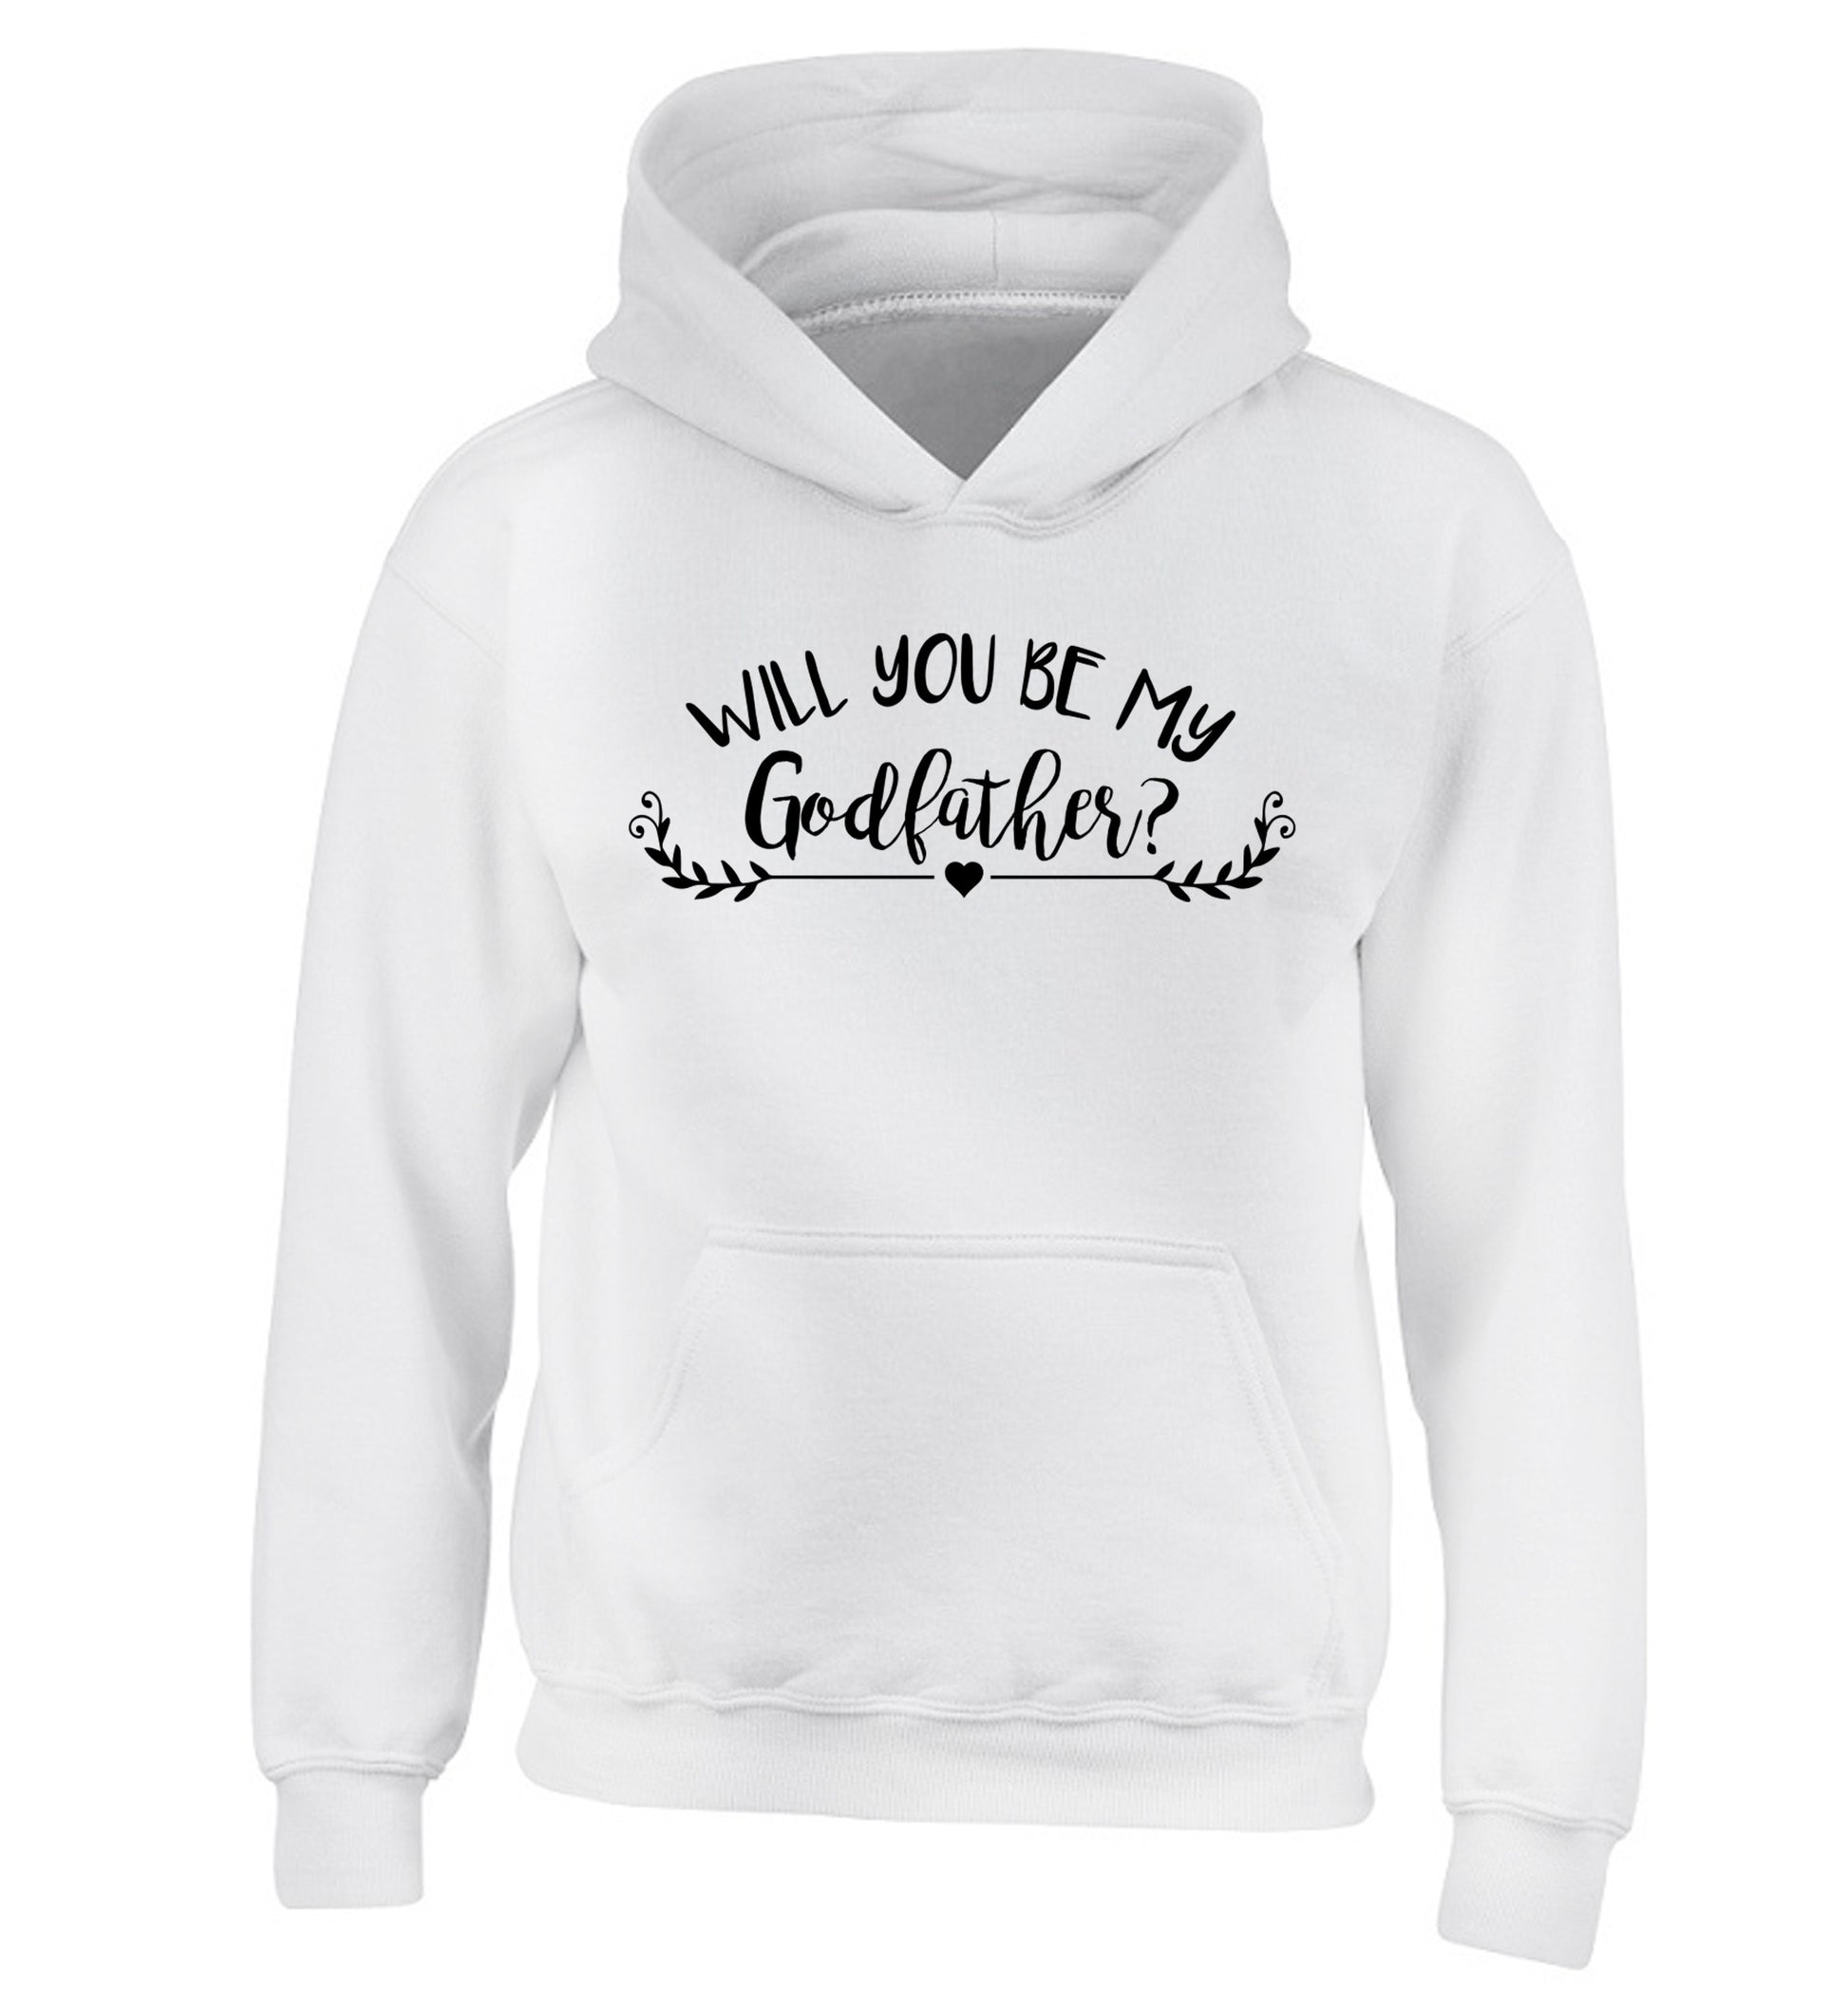 Will you be my godfather? children's white hoodie 12-14 Years